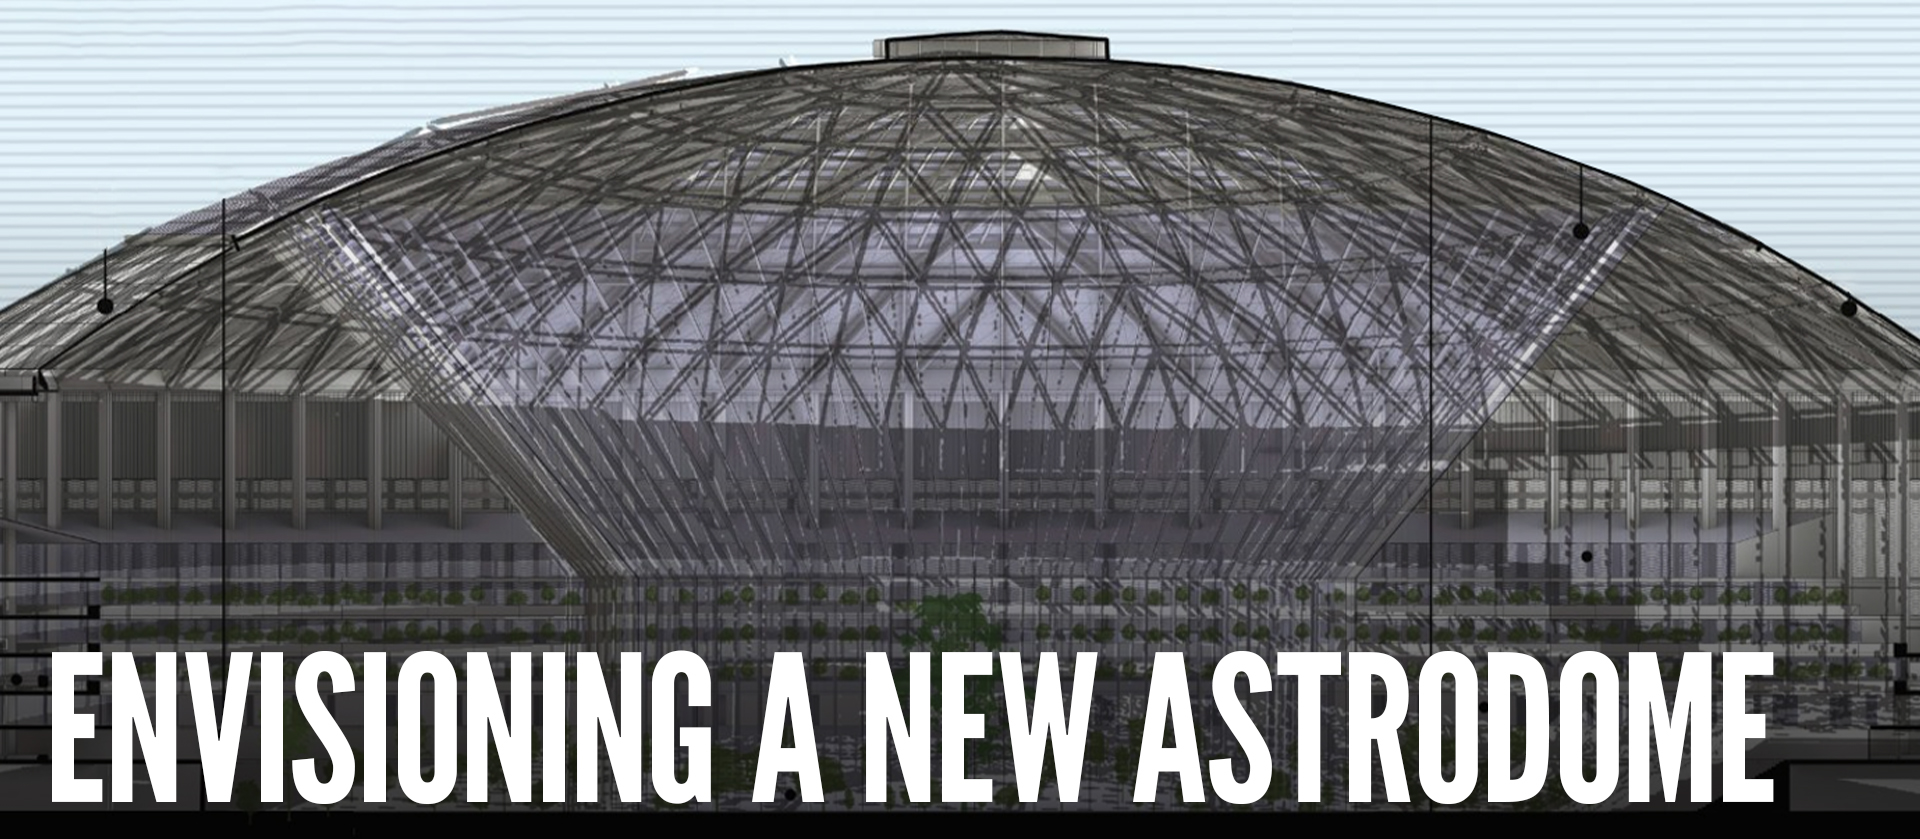 Envisioning a New Astrodome Through an Integrated Approach